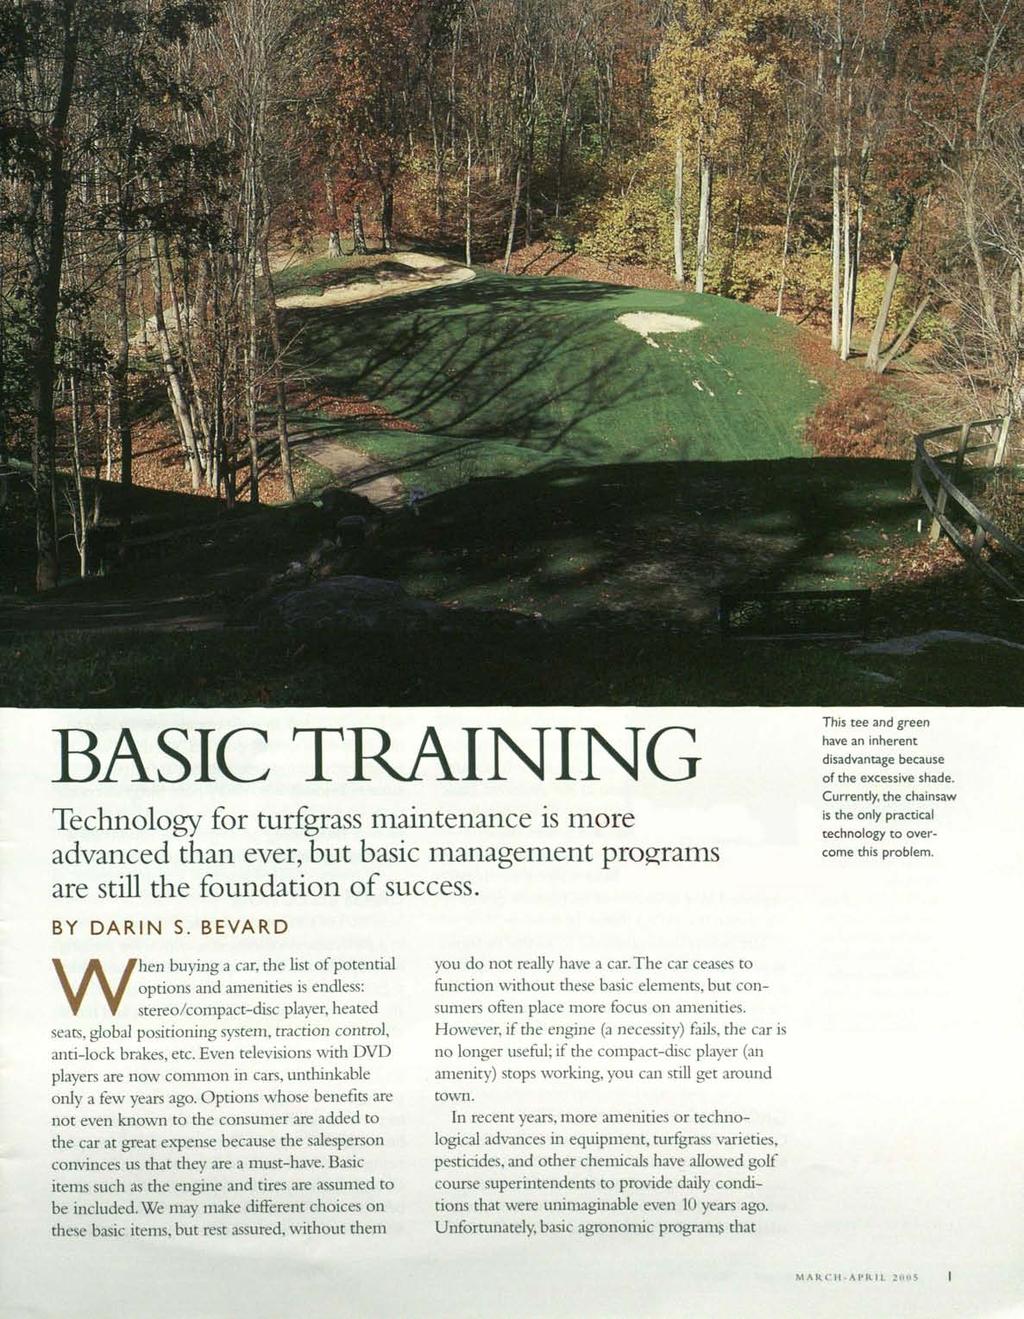 BASIC TRAINING Technology for turfgrass maintenance is more advanced than ever, but basic management programs are still the foundation of success.